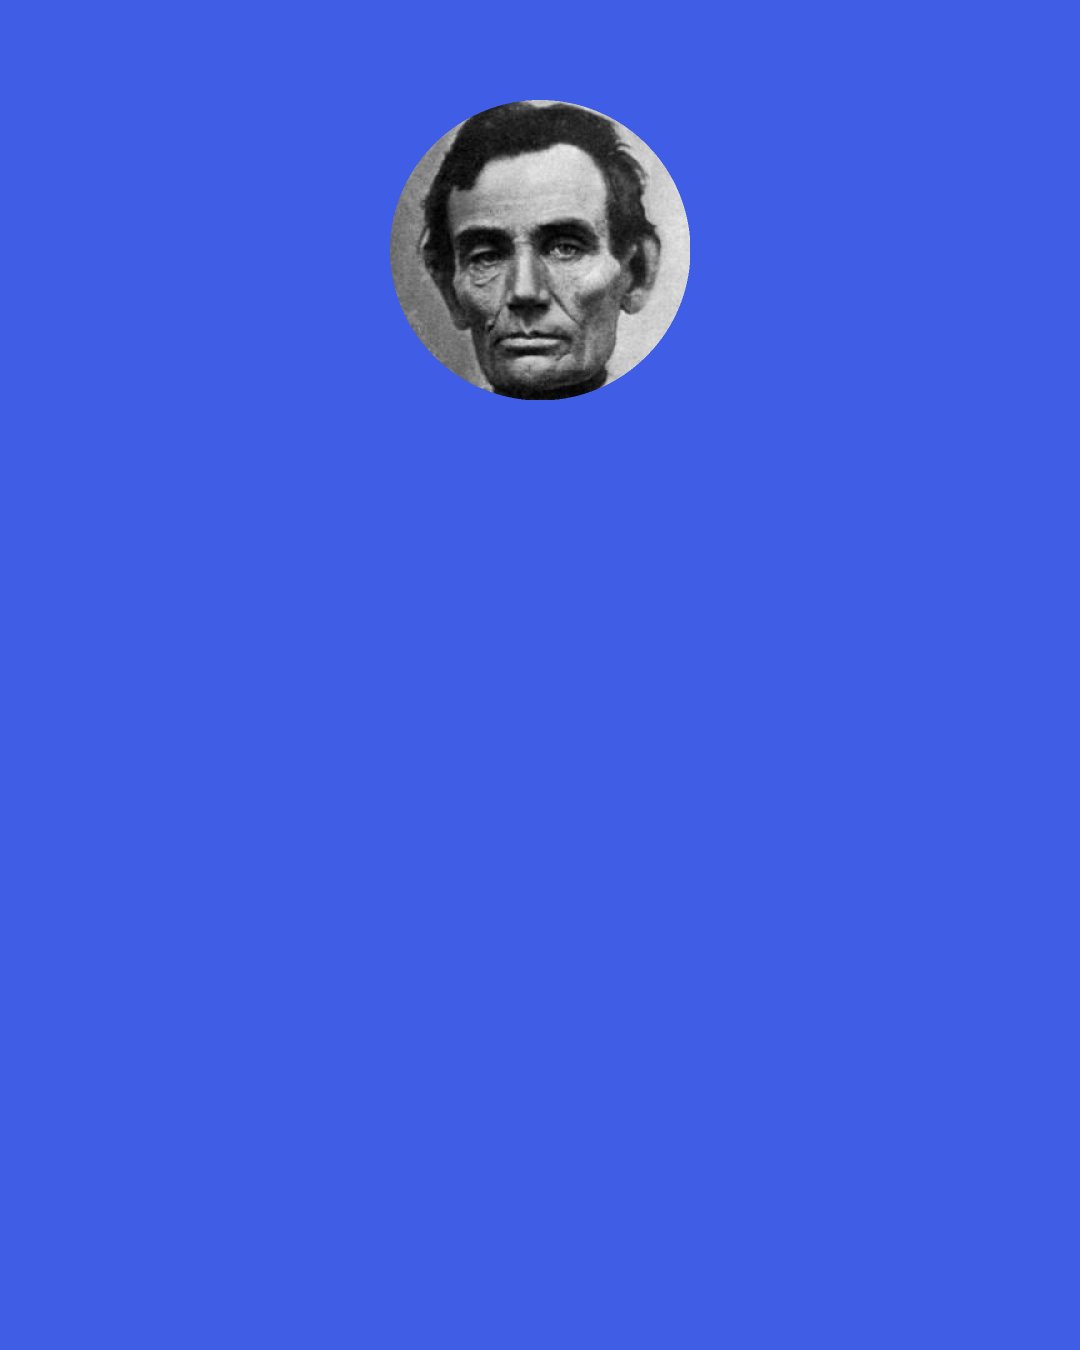 Abraham Lincoln: I am slow to listen to criminations among friends, and never espouse their quarrels on either side. My sincere wish is that both sides will allow bygones to be bygones, and look to the present & future only.